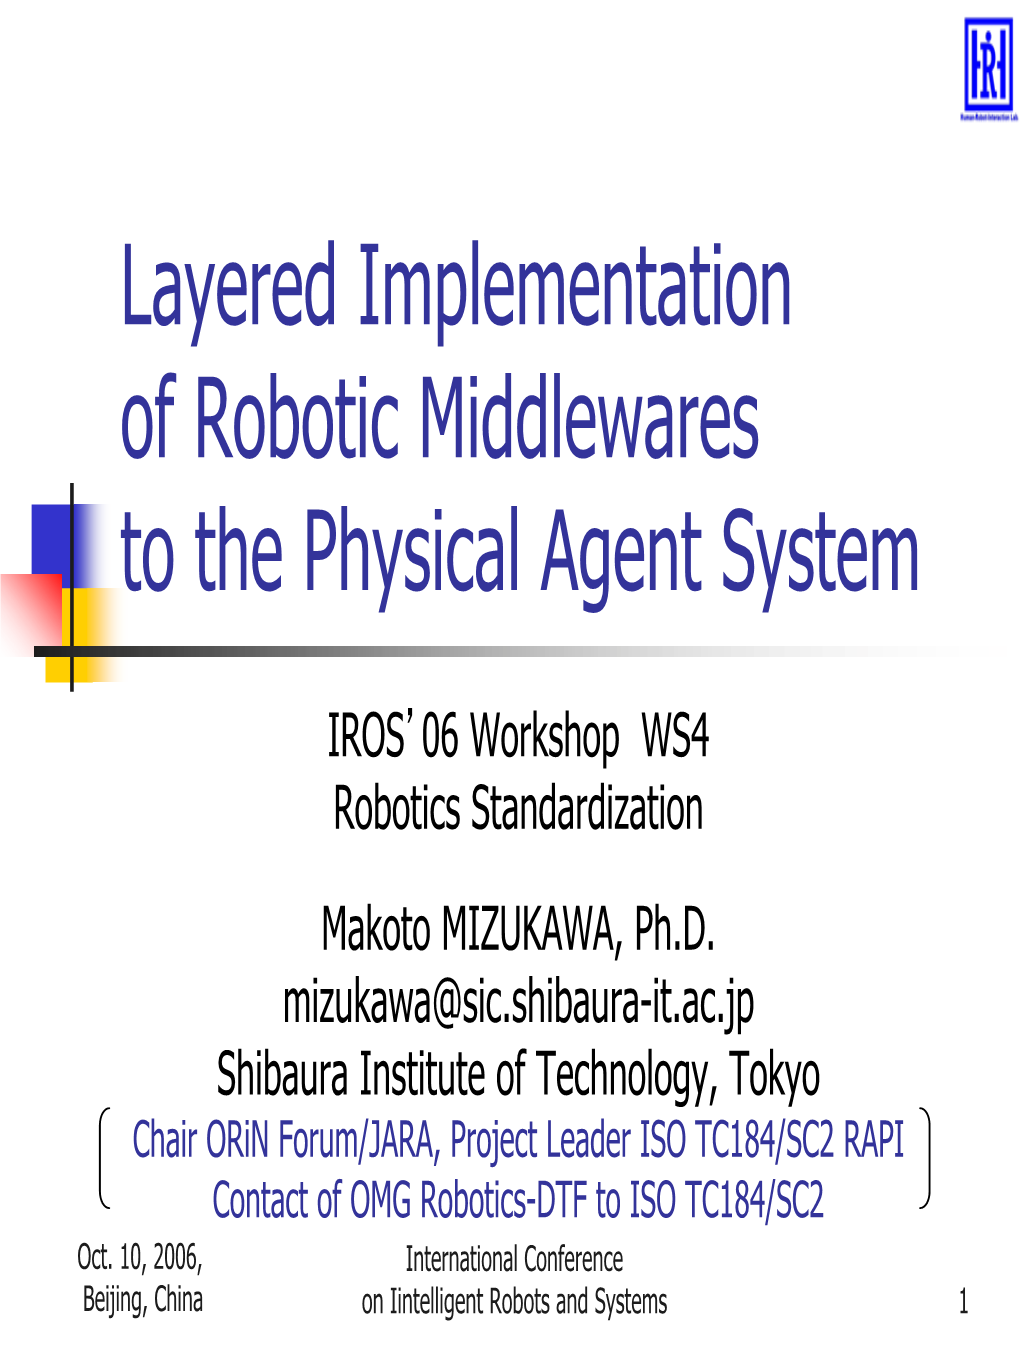 Robotic Middlewares to the Physical Agent System